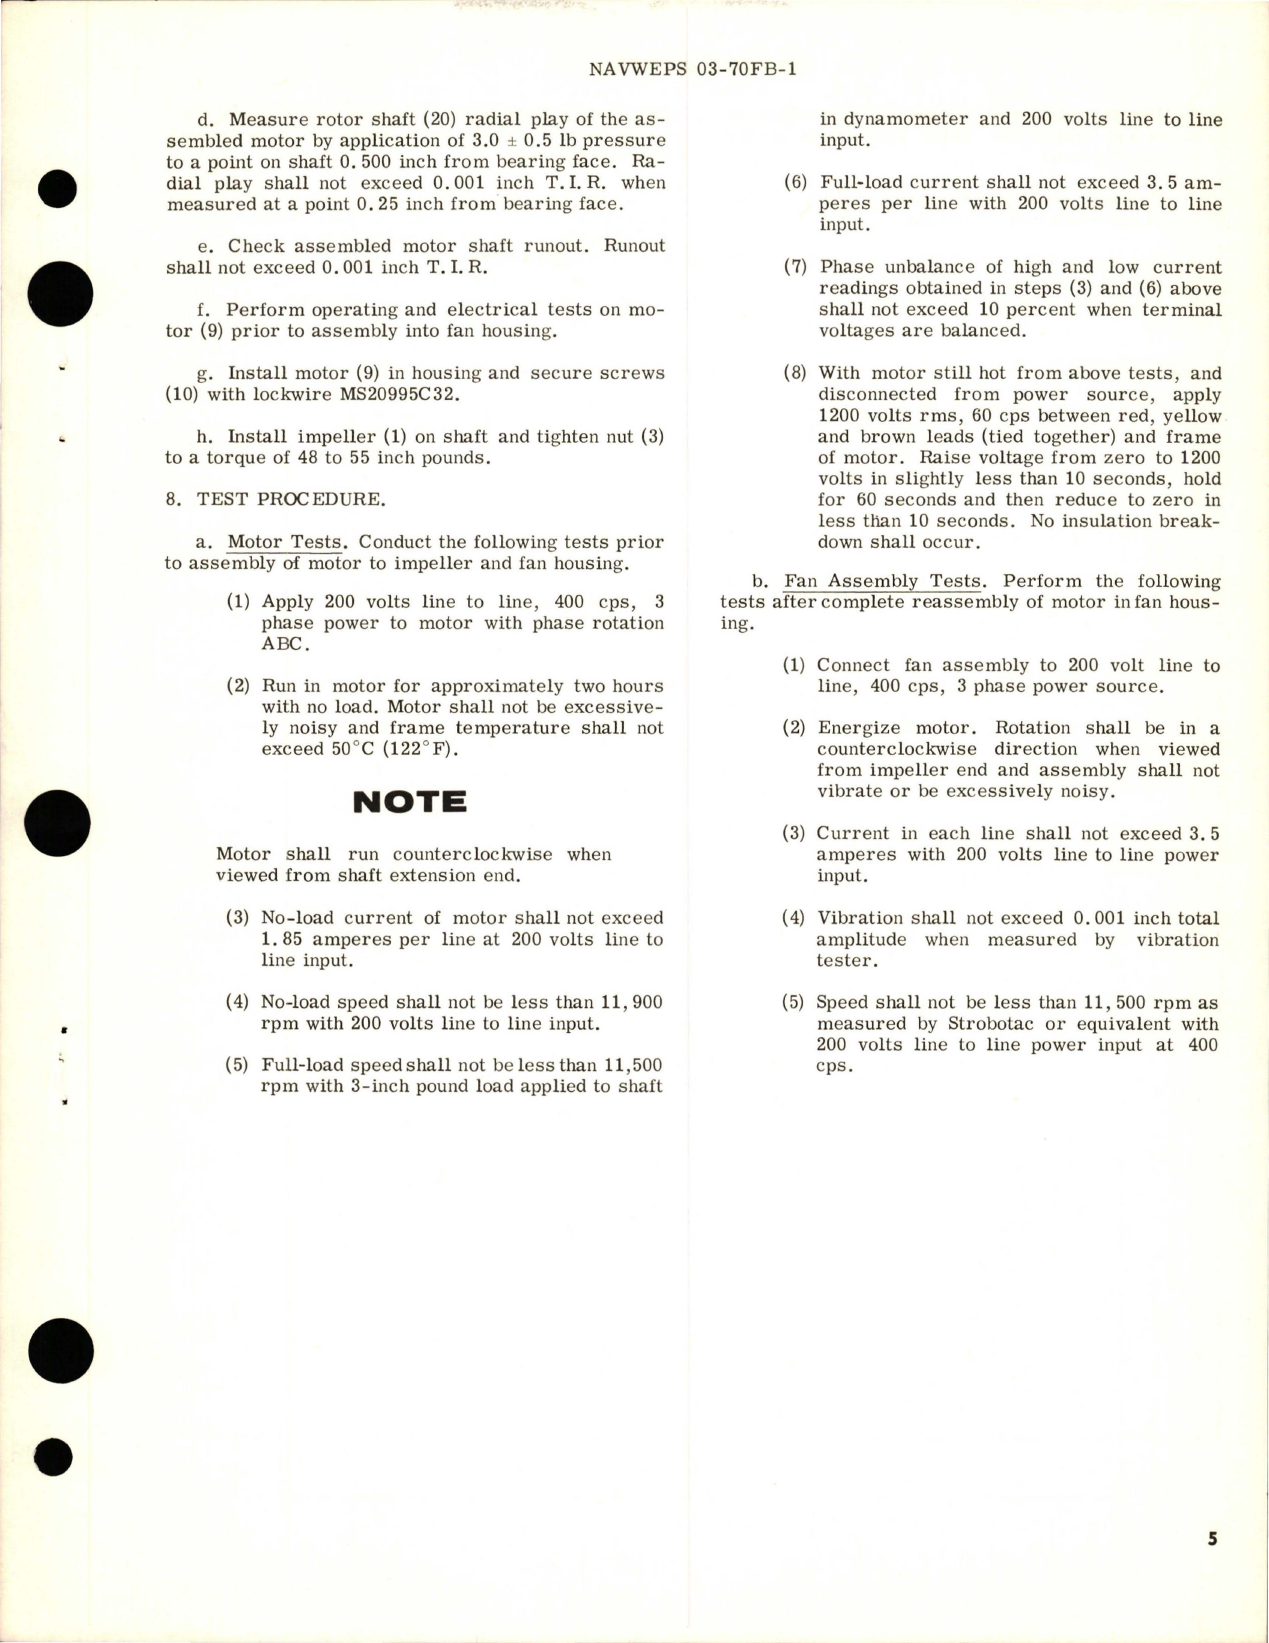 Sample page 5 from AirCorps Library document: Overhaul Instructions with Parts Breakdown for Ventilating Air Fan - R-2879-1